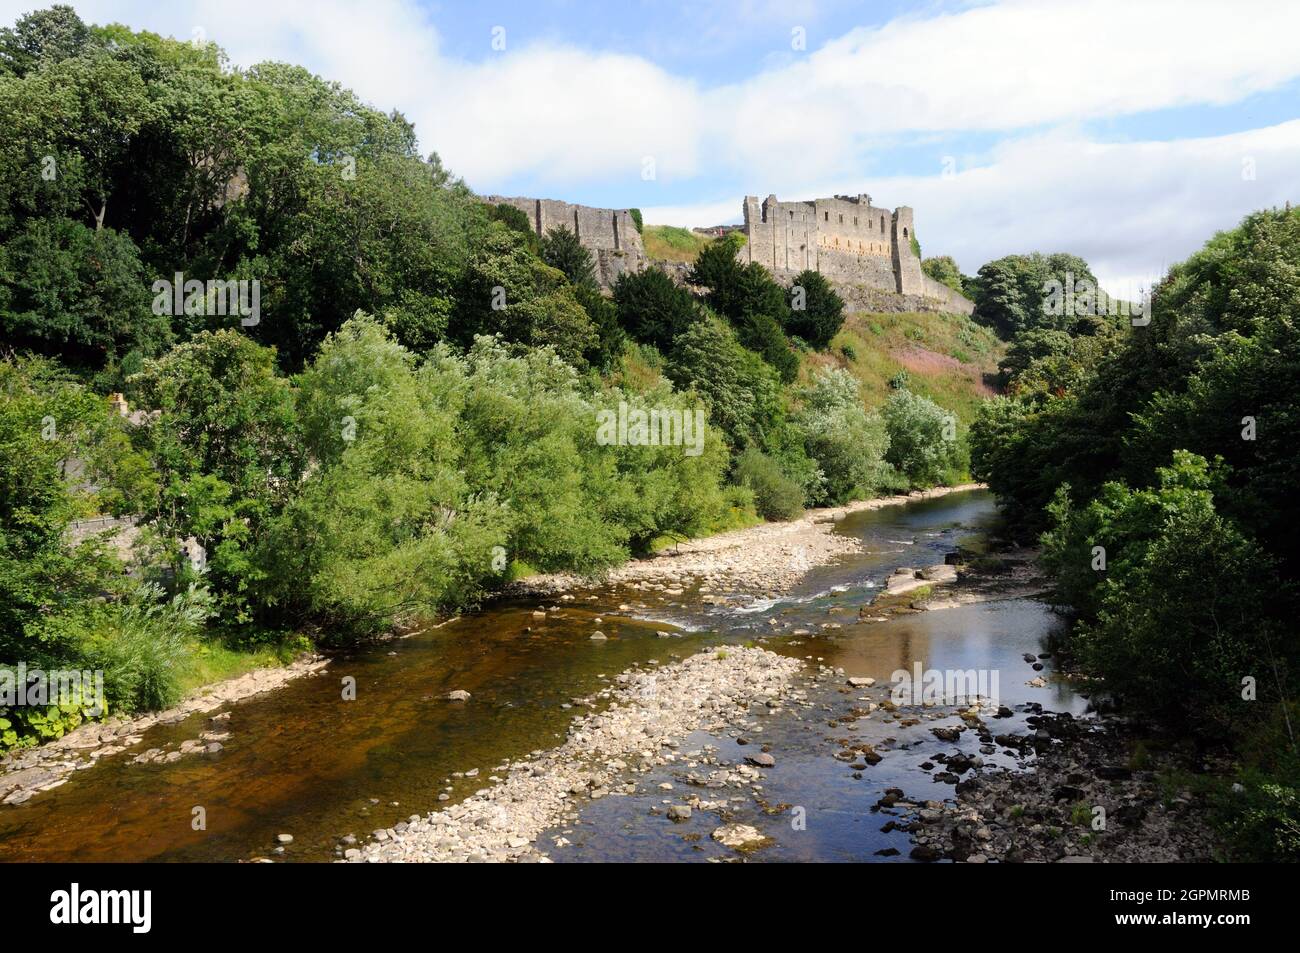 Part of the ruins of Richmond Castle, rising above the River Swale in Richmond, Yorkshire, England Stock Photo